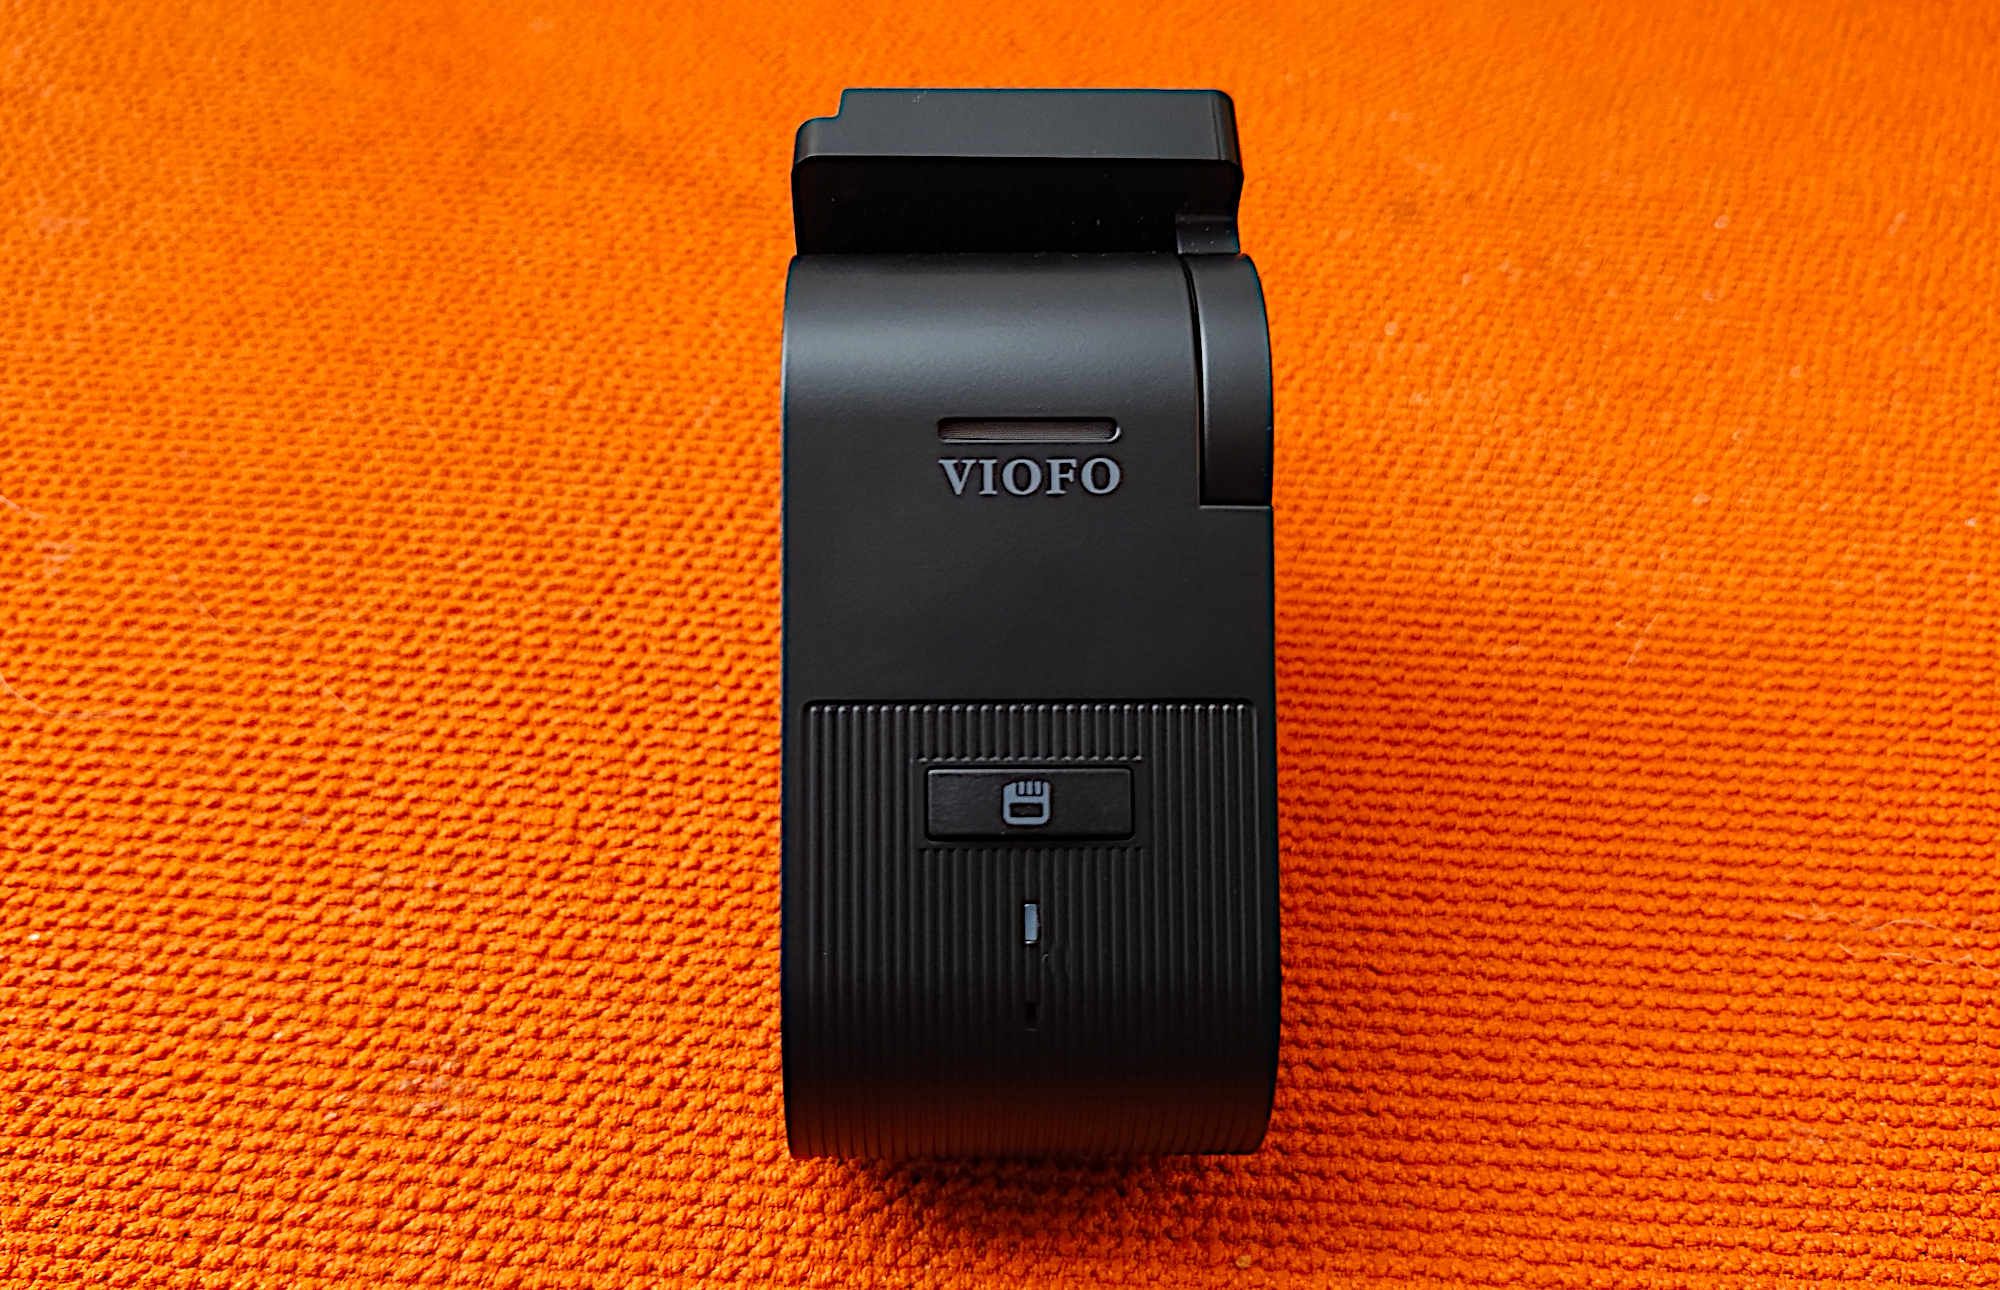 Viofo VS1 Mini 2K overview: This minute move cam delivers the products